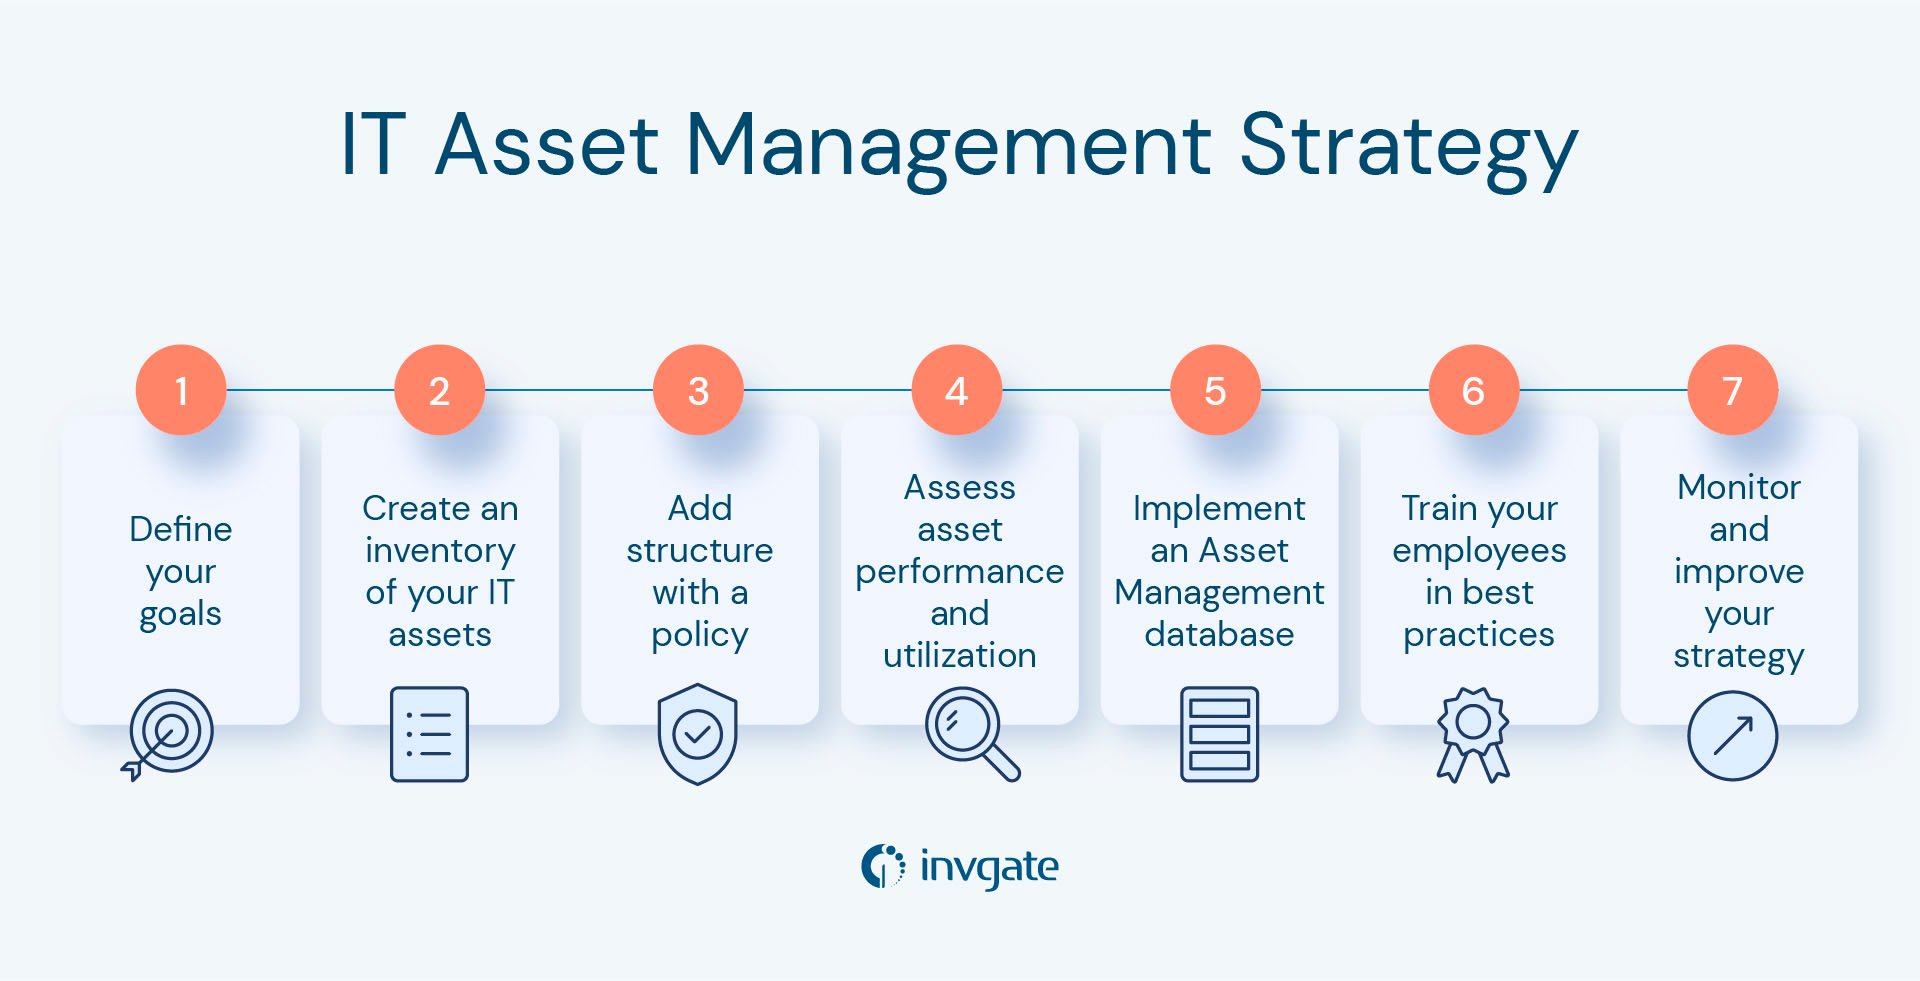 Detail of the seven steps to develop an IT Asset Management strategy.